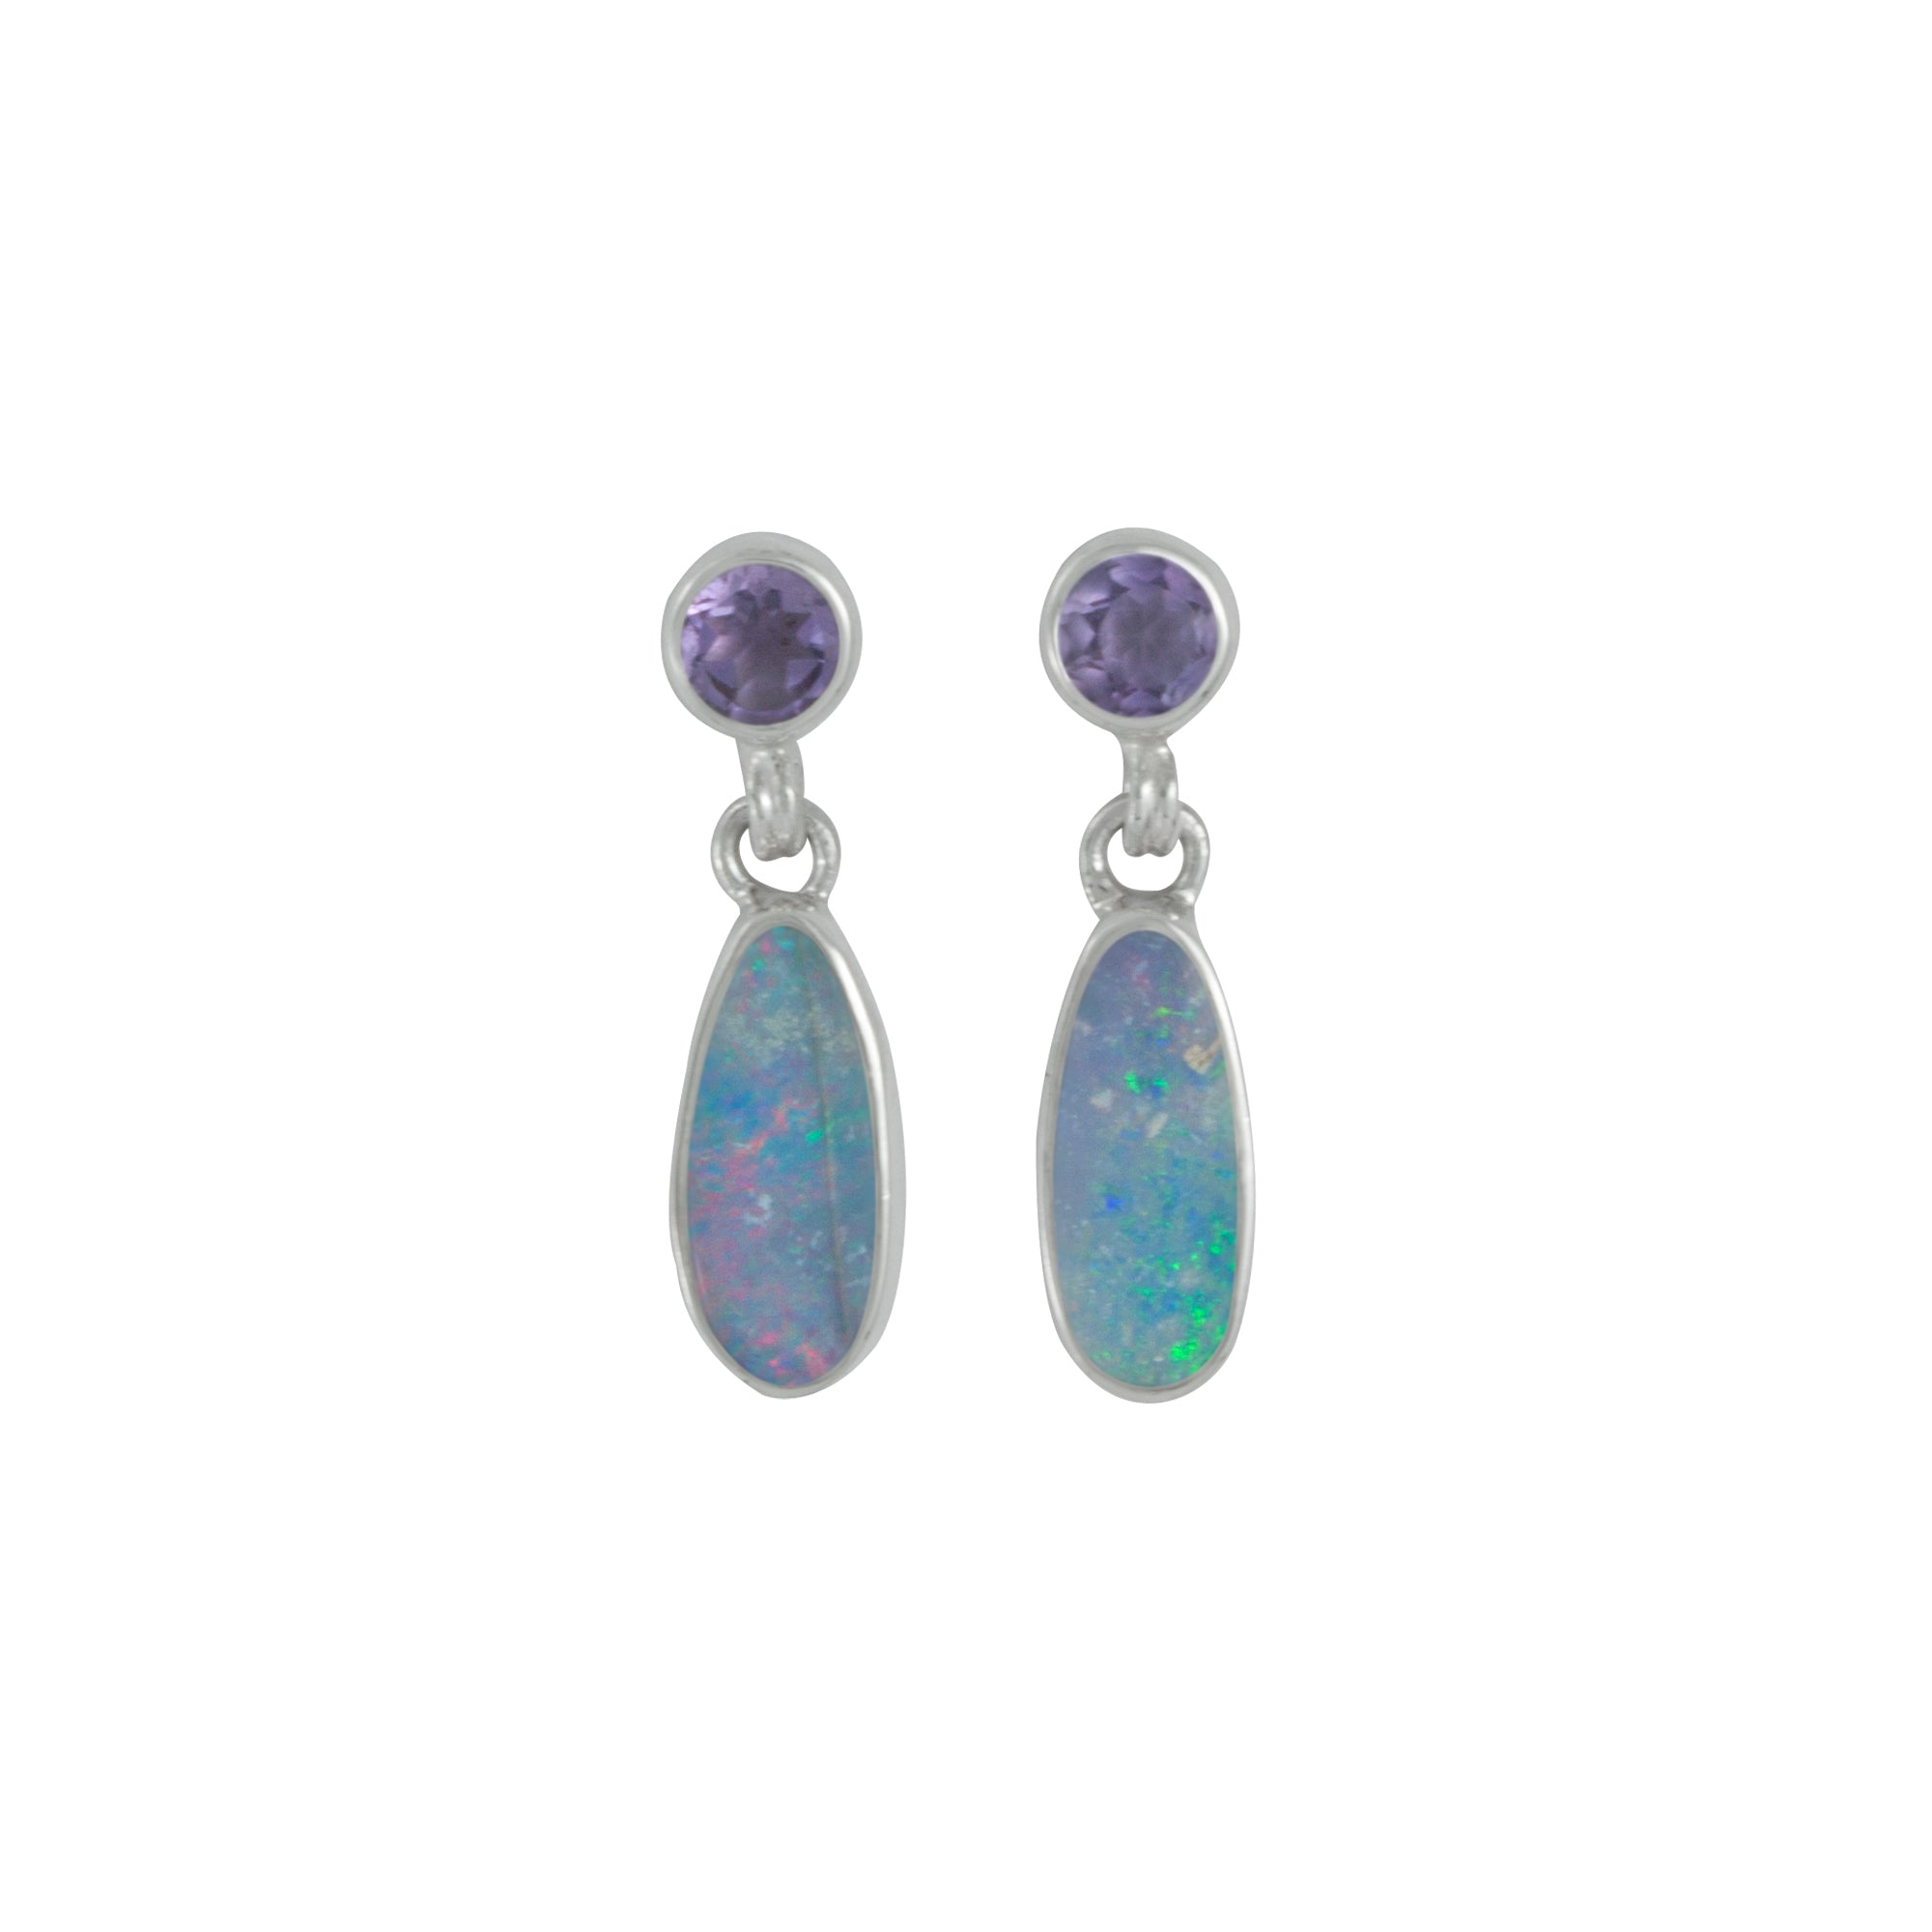 Silver Earring Stud With Round Stone & Free Form Opal